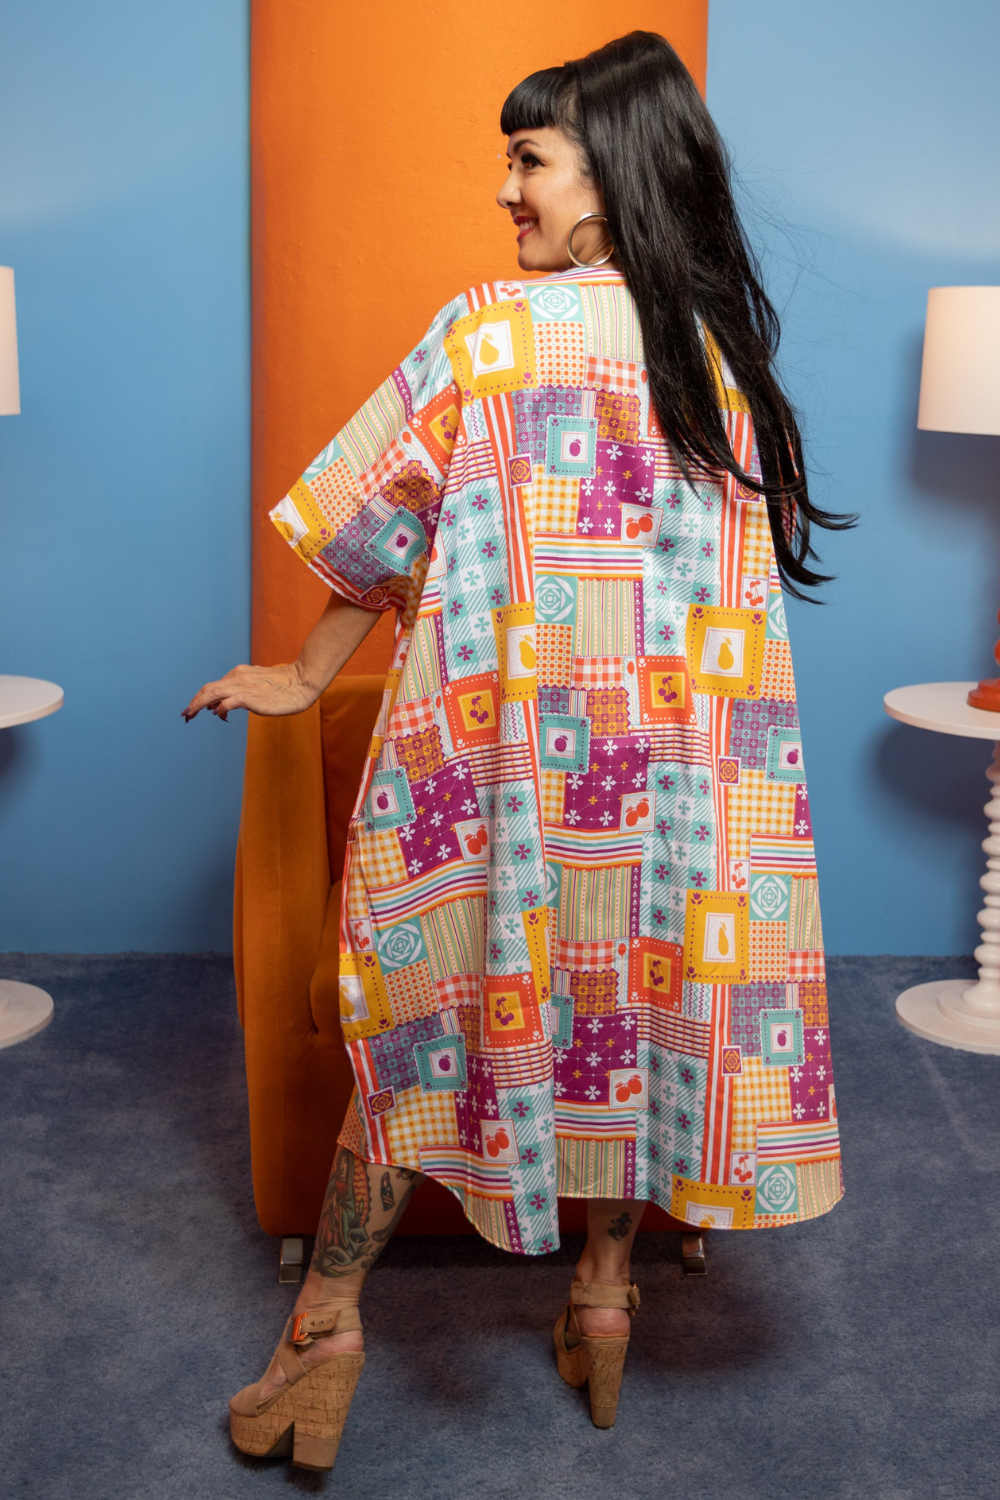 Back view of dark haired model wearing a colorful dress with a patchwork design